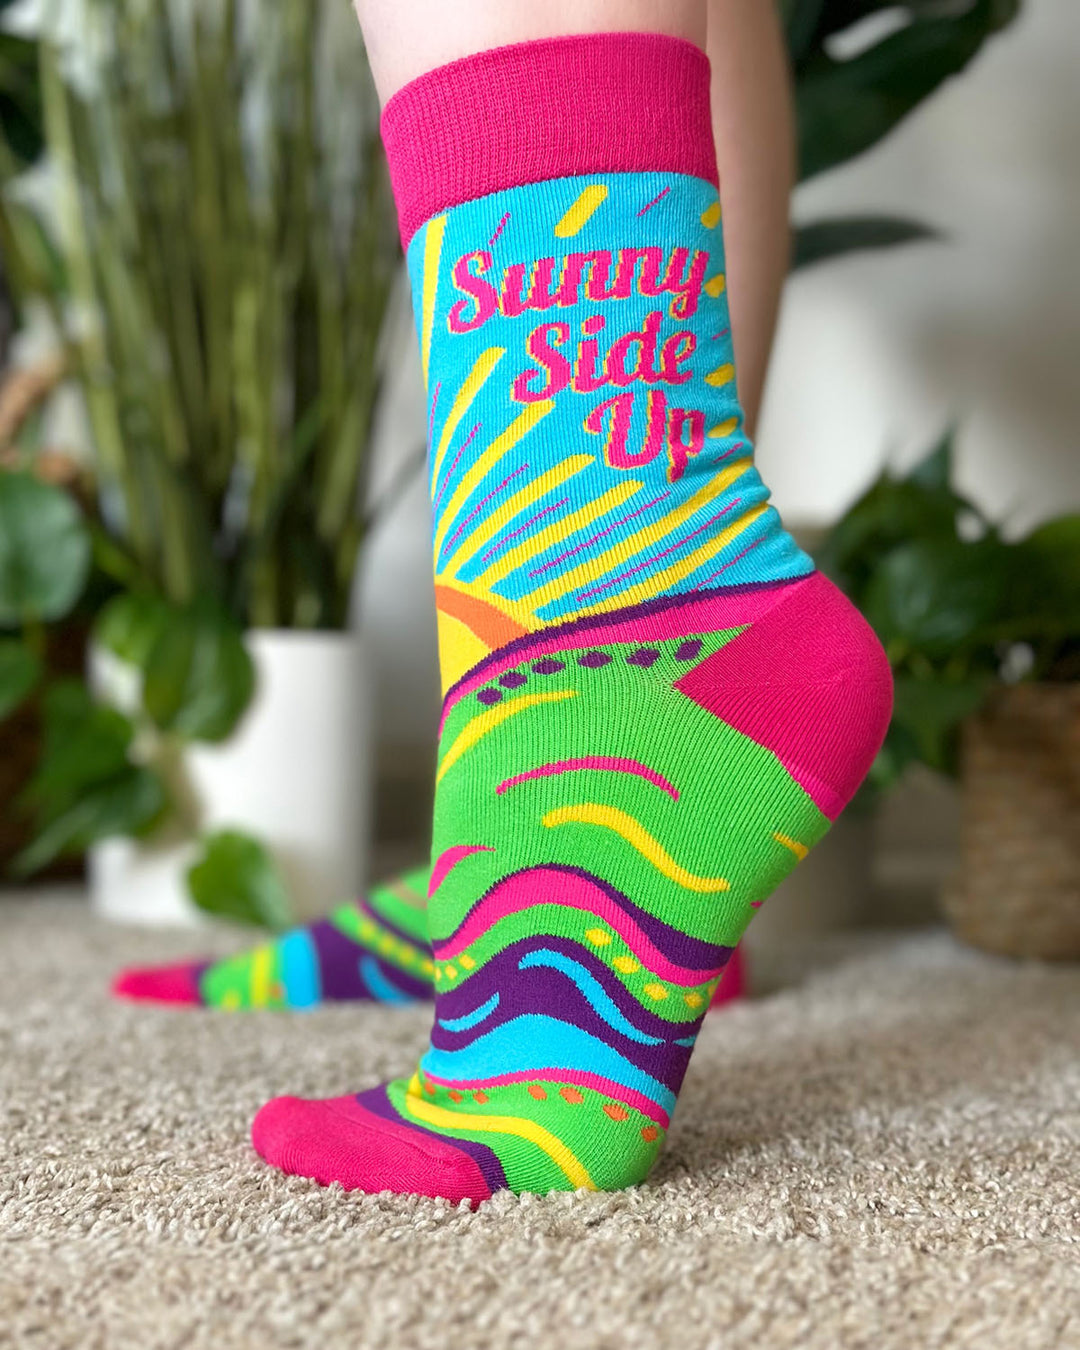 Features beautiful sun, a clear blue sky, and the saying "Sunny Side Up" Ladies' Novelty Crew Socks.